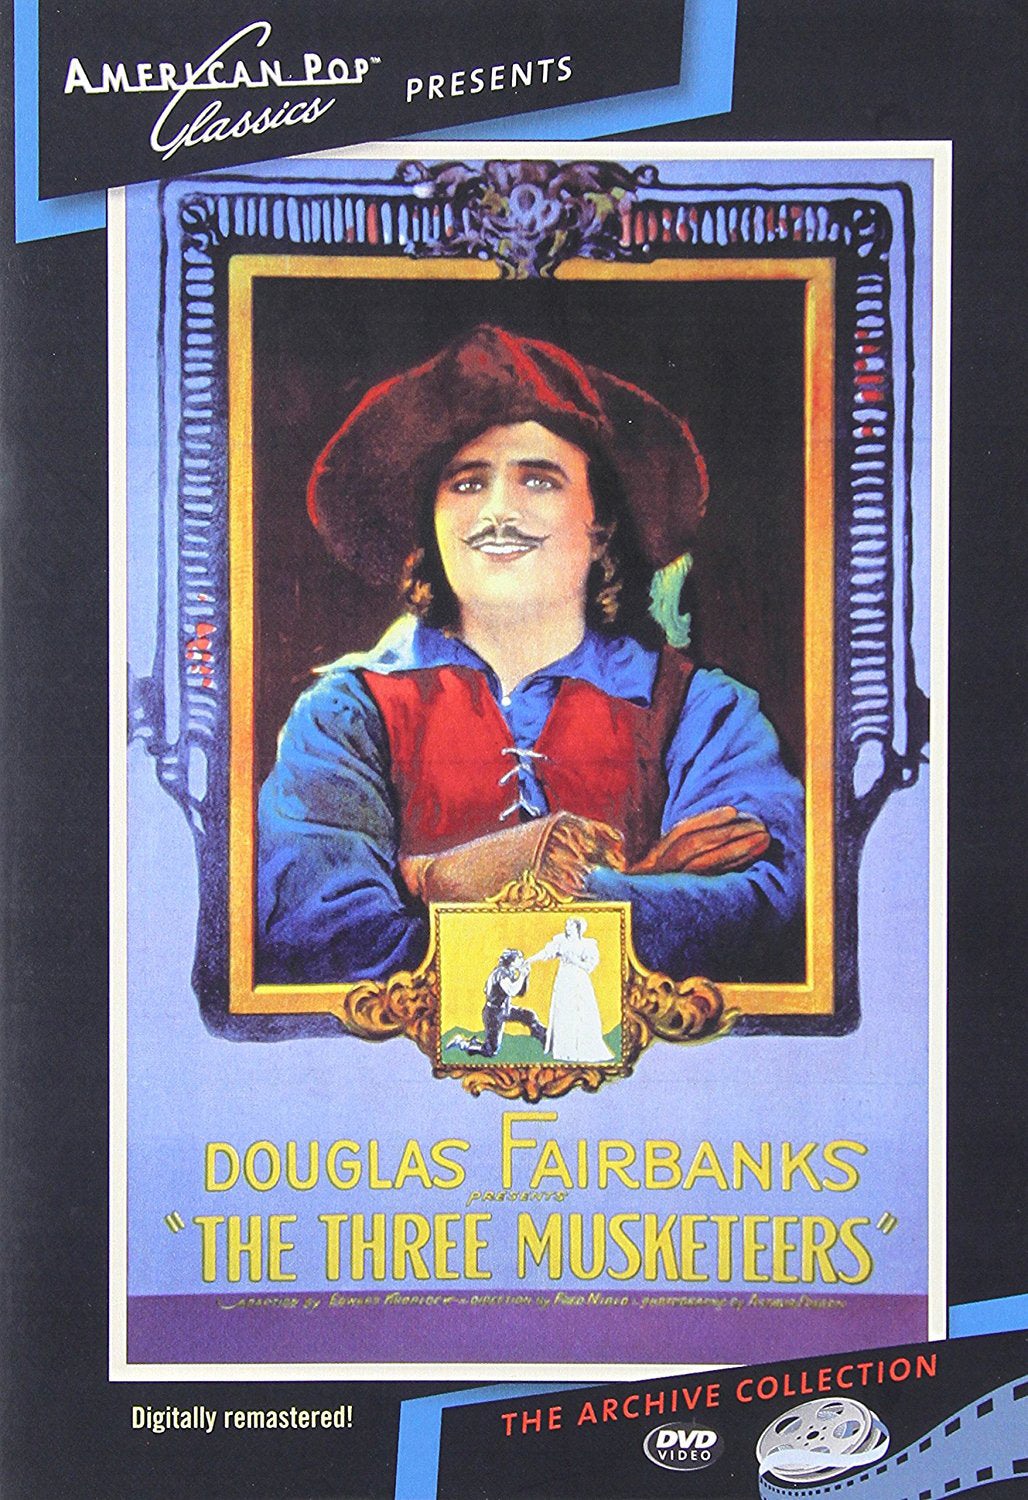 Three Musketeers cover art